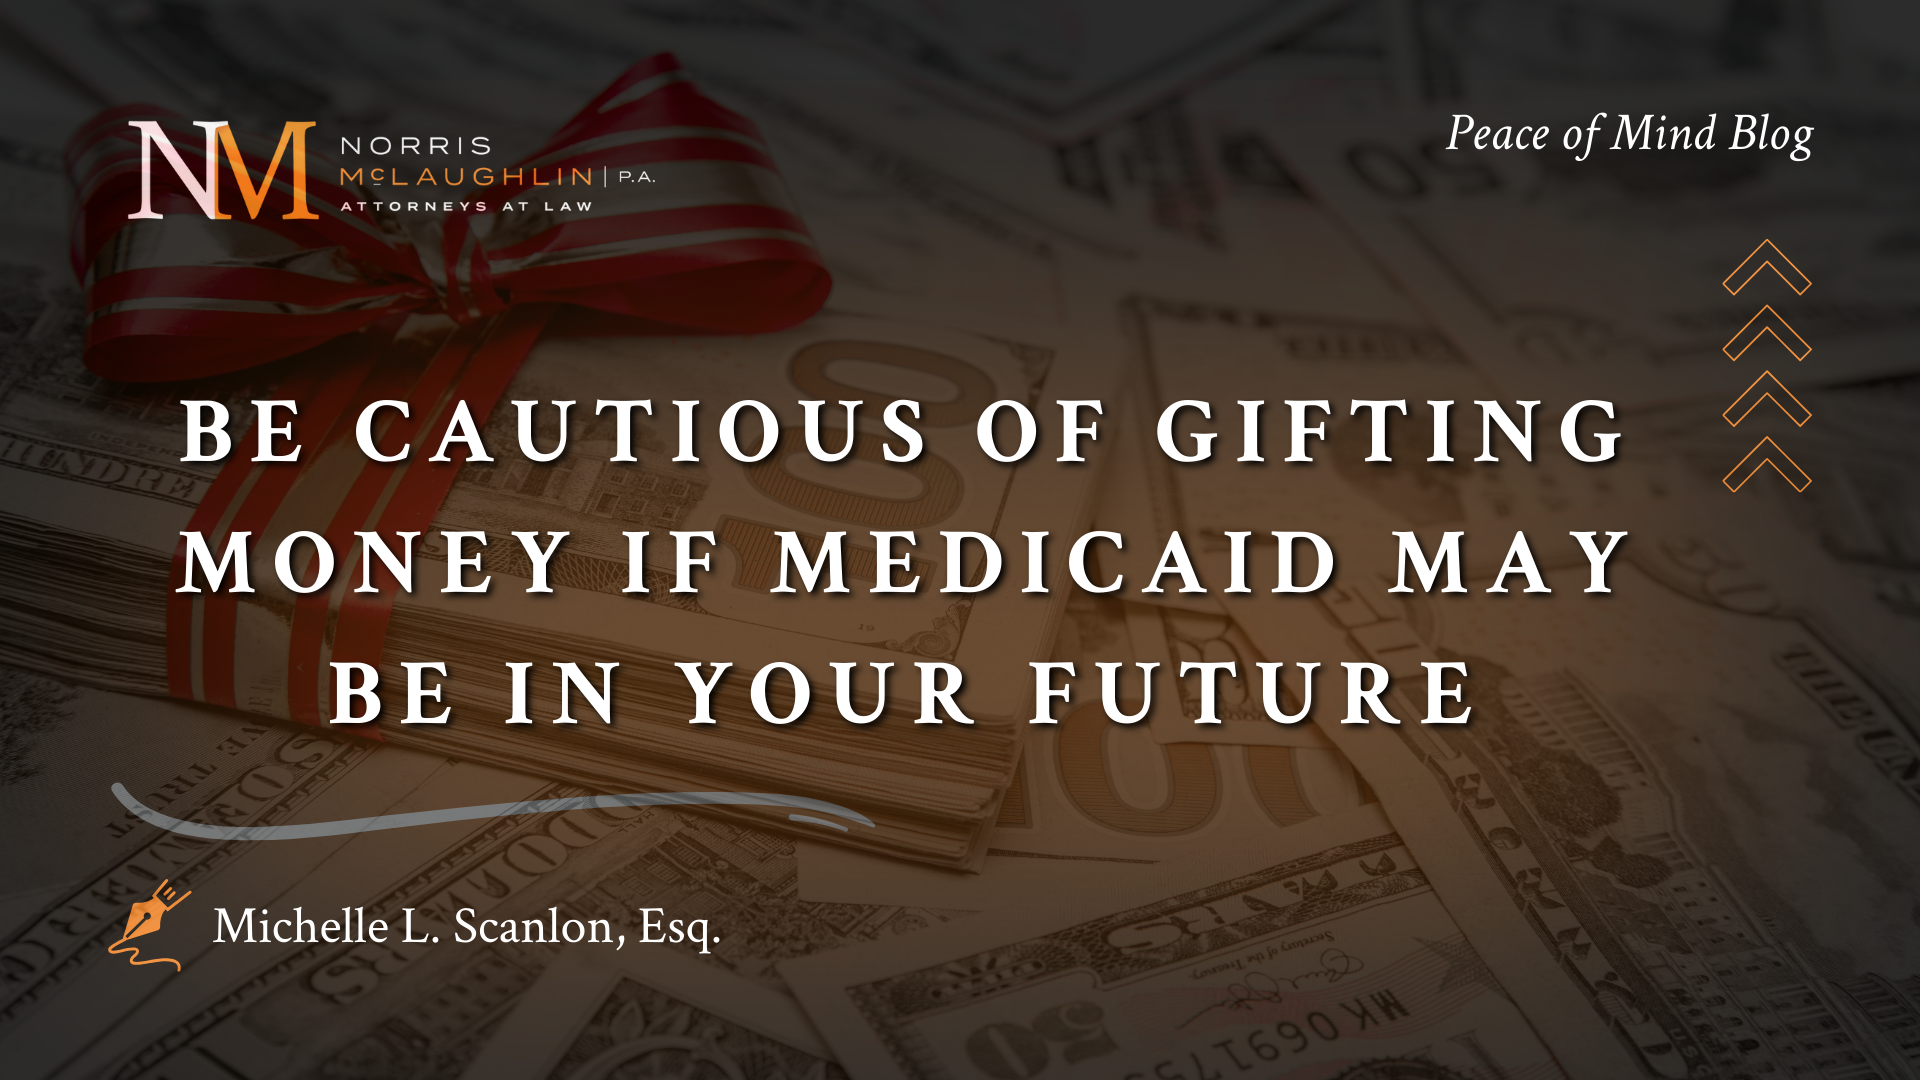 Be Cautious of Gifting Money if Medicaid may be in Your Future